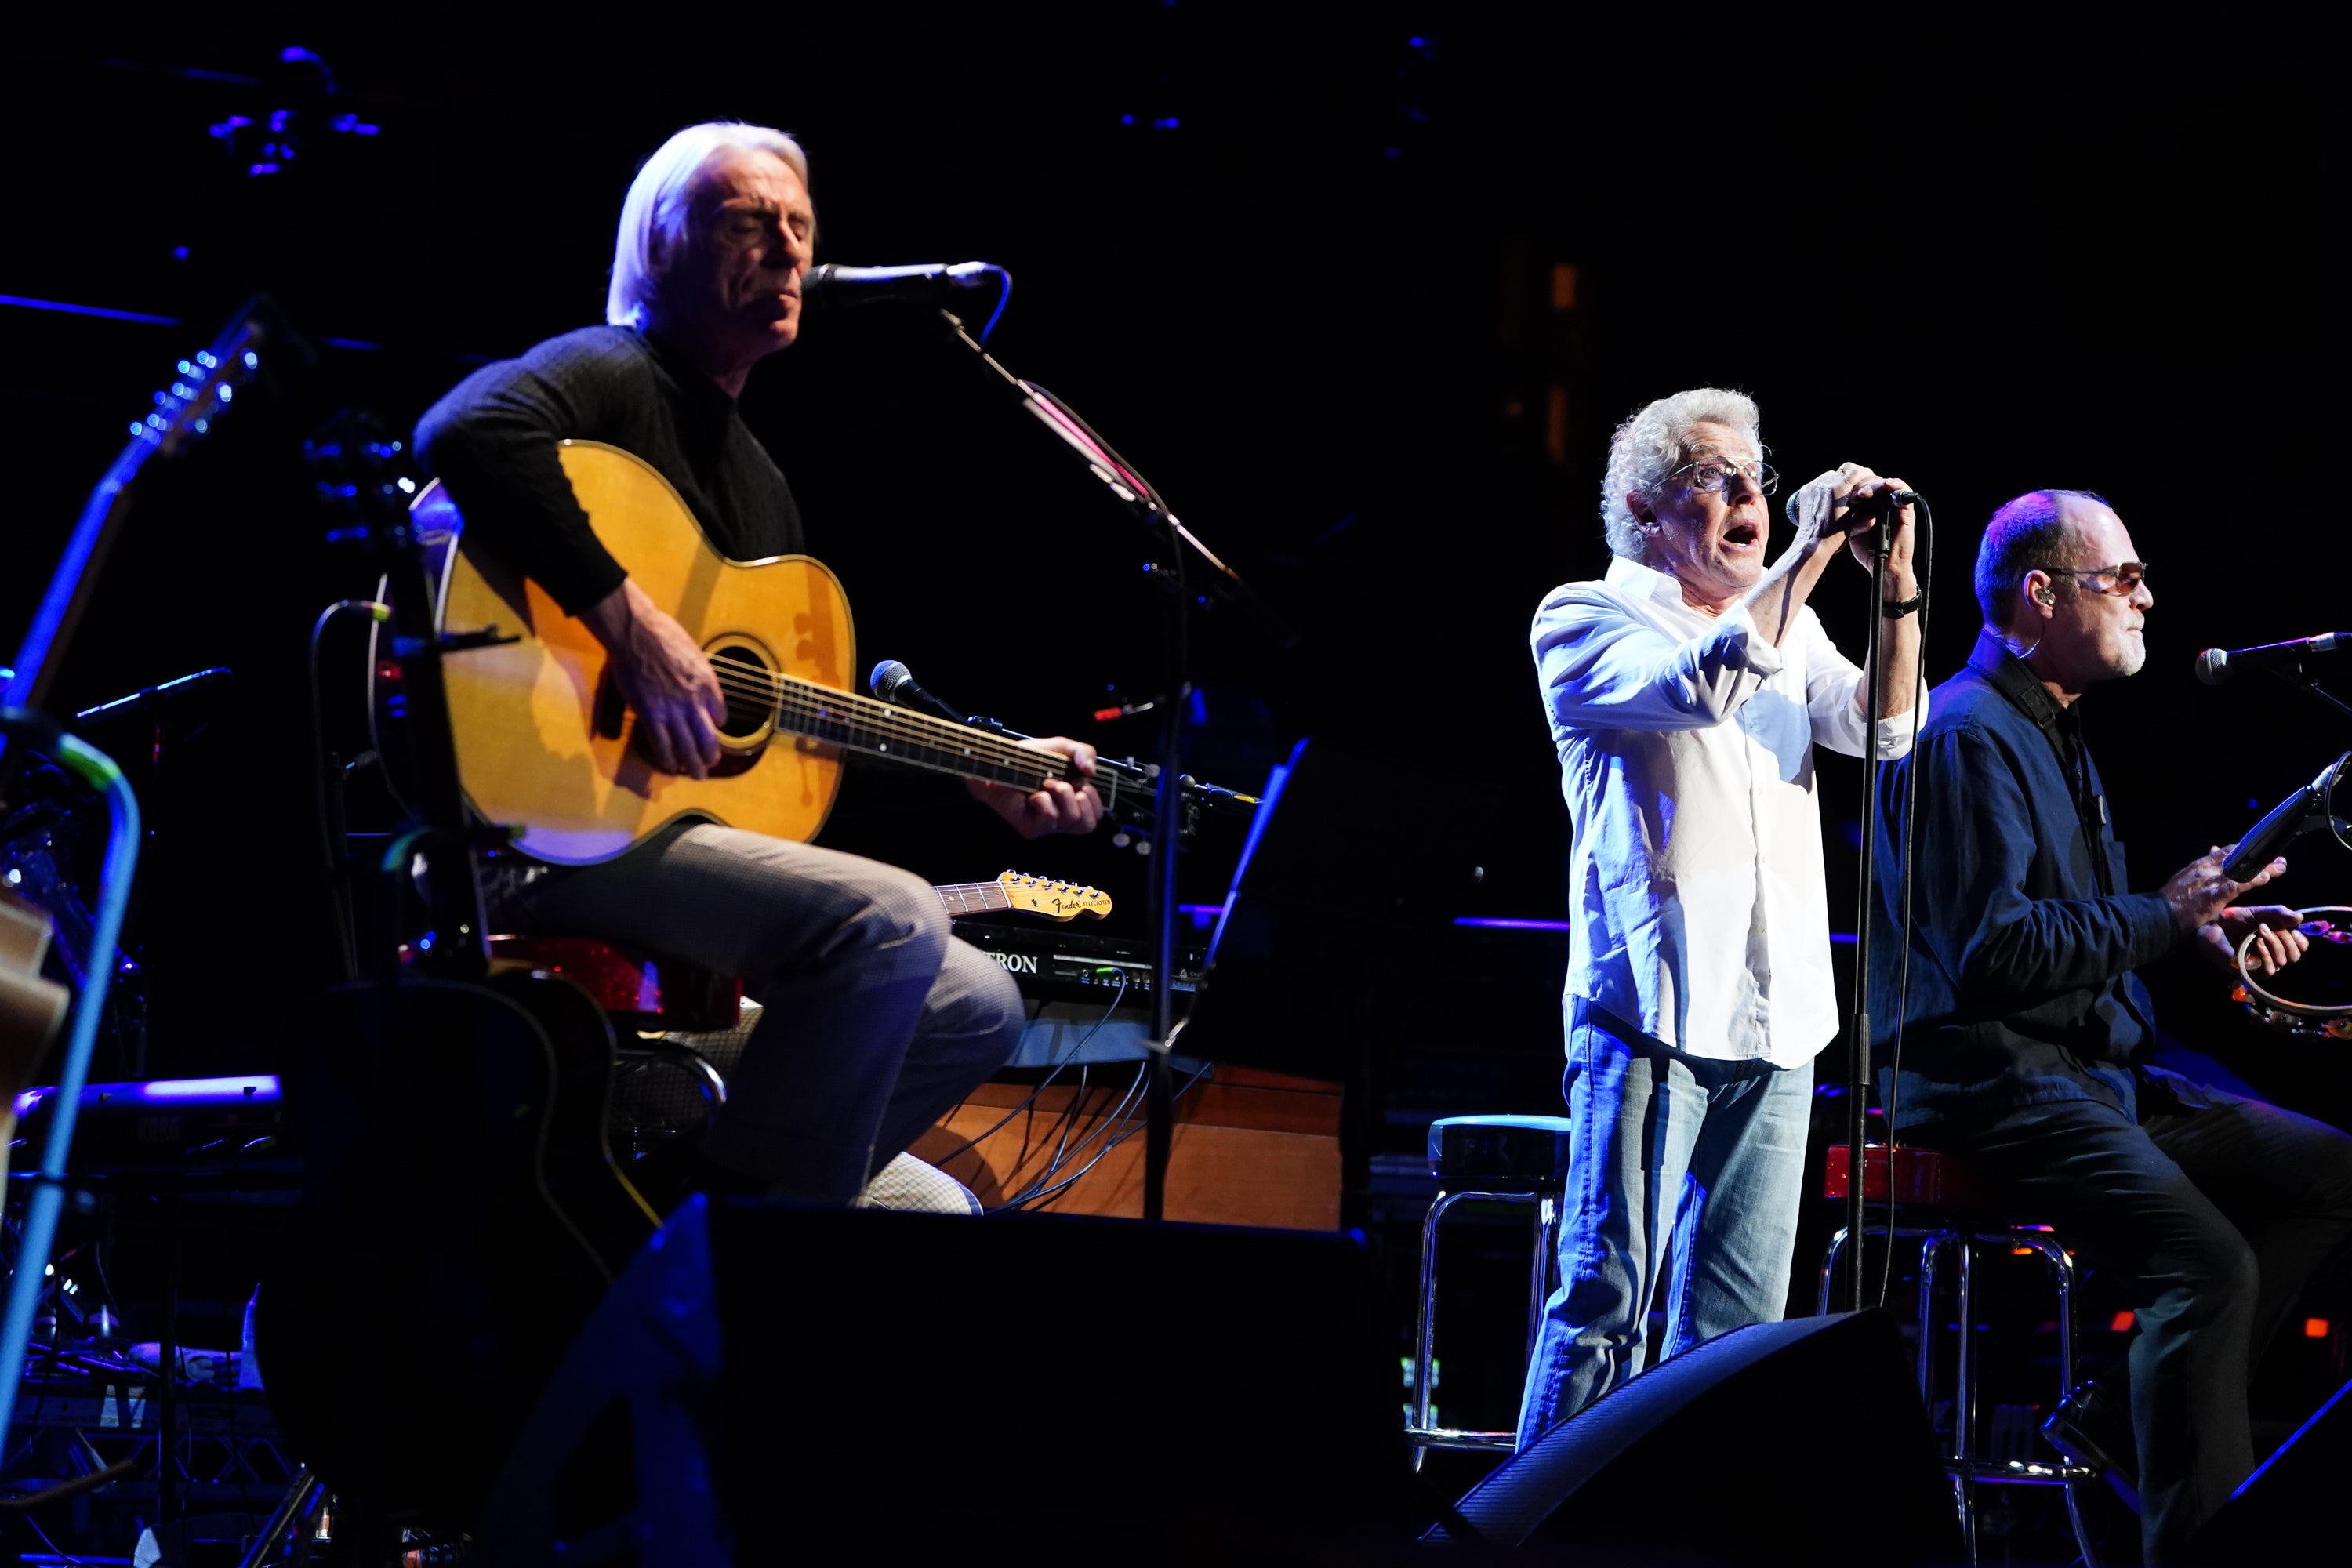 Paul Weller (left) and Roger Daltrey (centre), on stage during Ovation, a celebration of 24 Years of gigs for the Teenage Cancer Trust, at the Royal Albert Hall, London